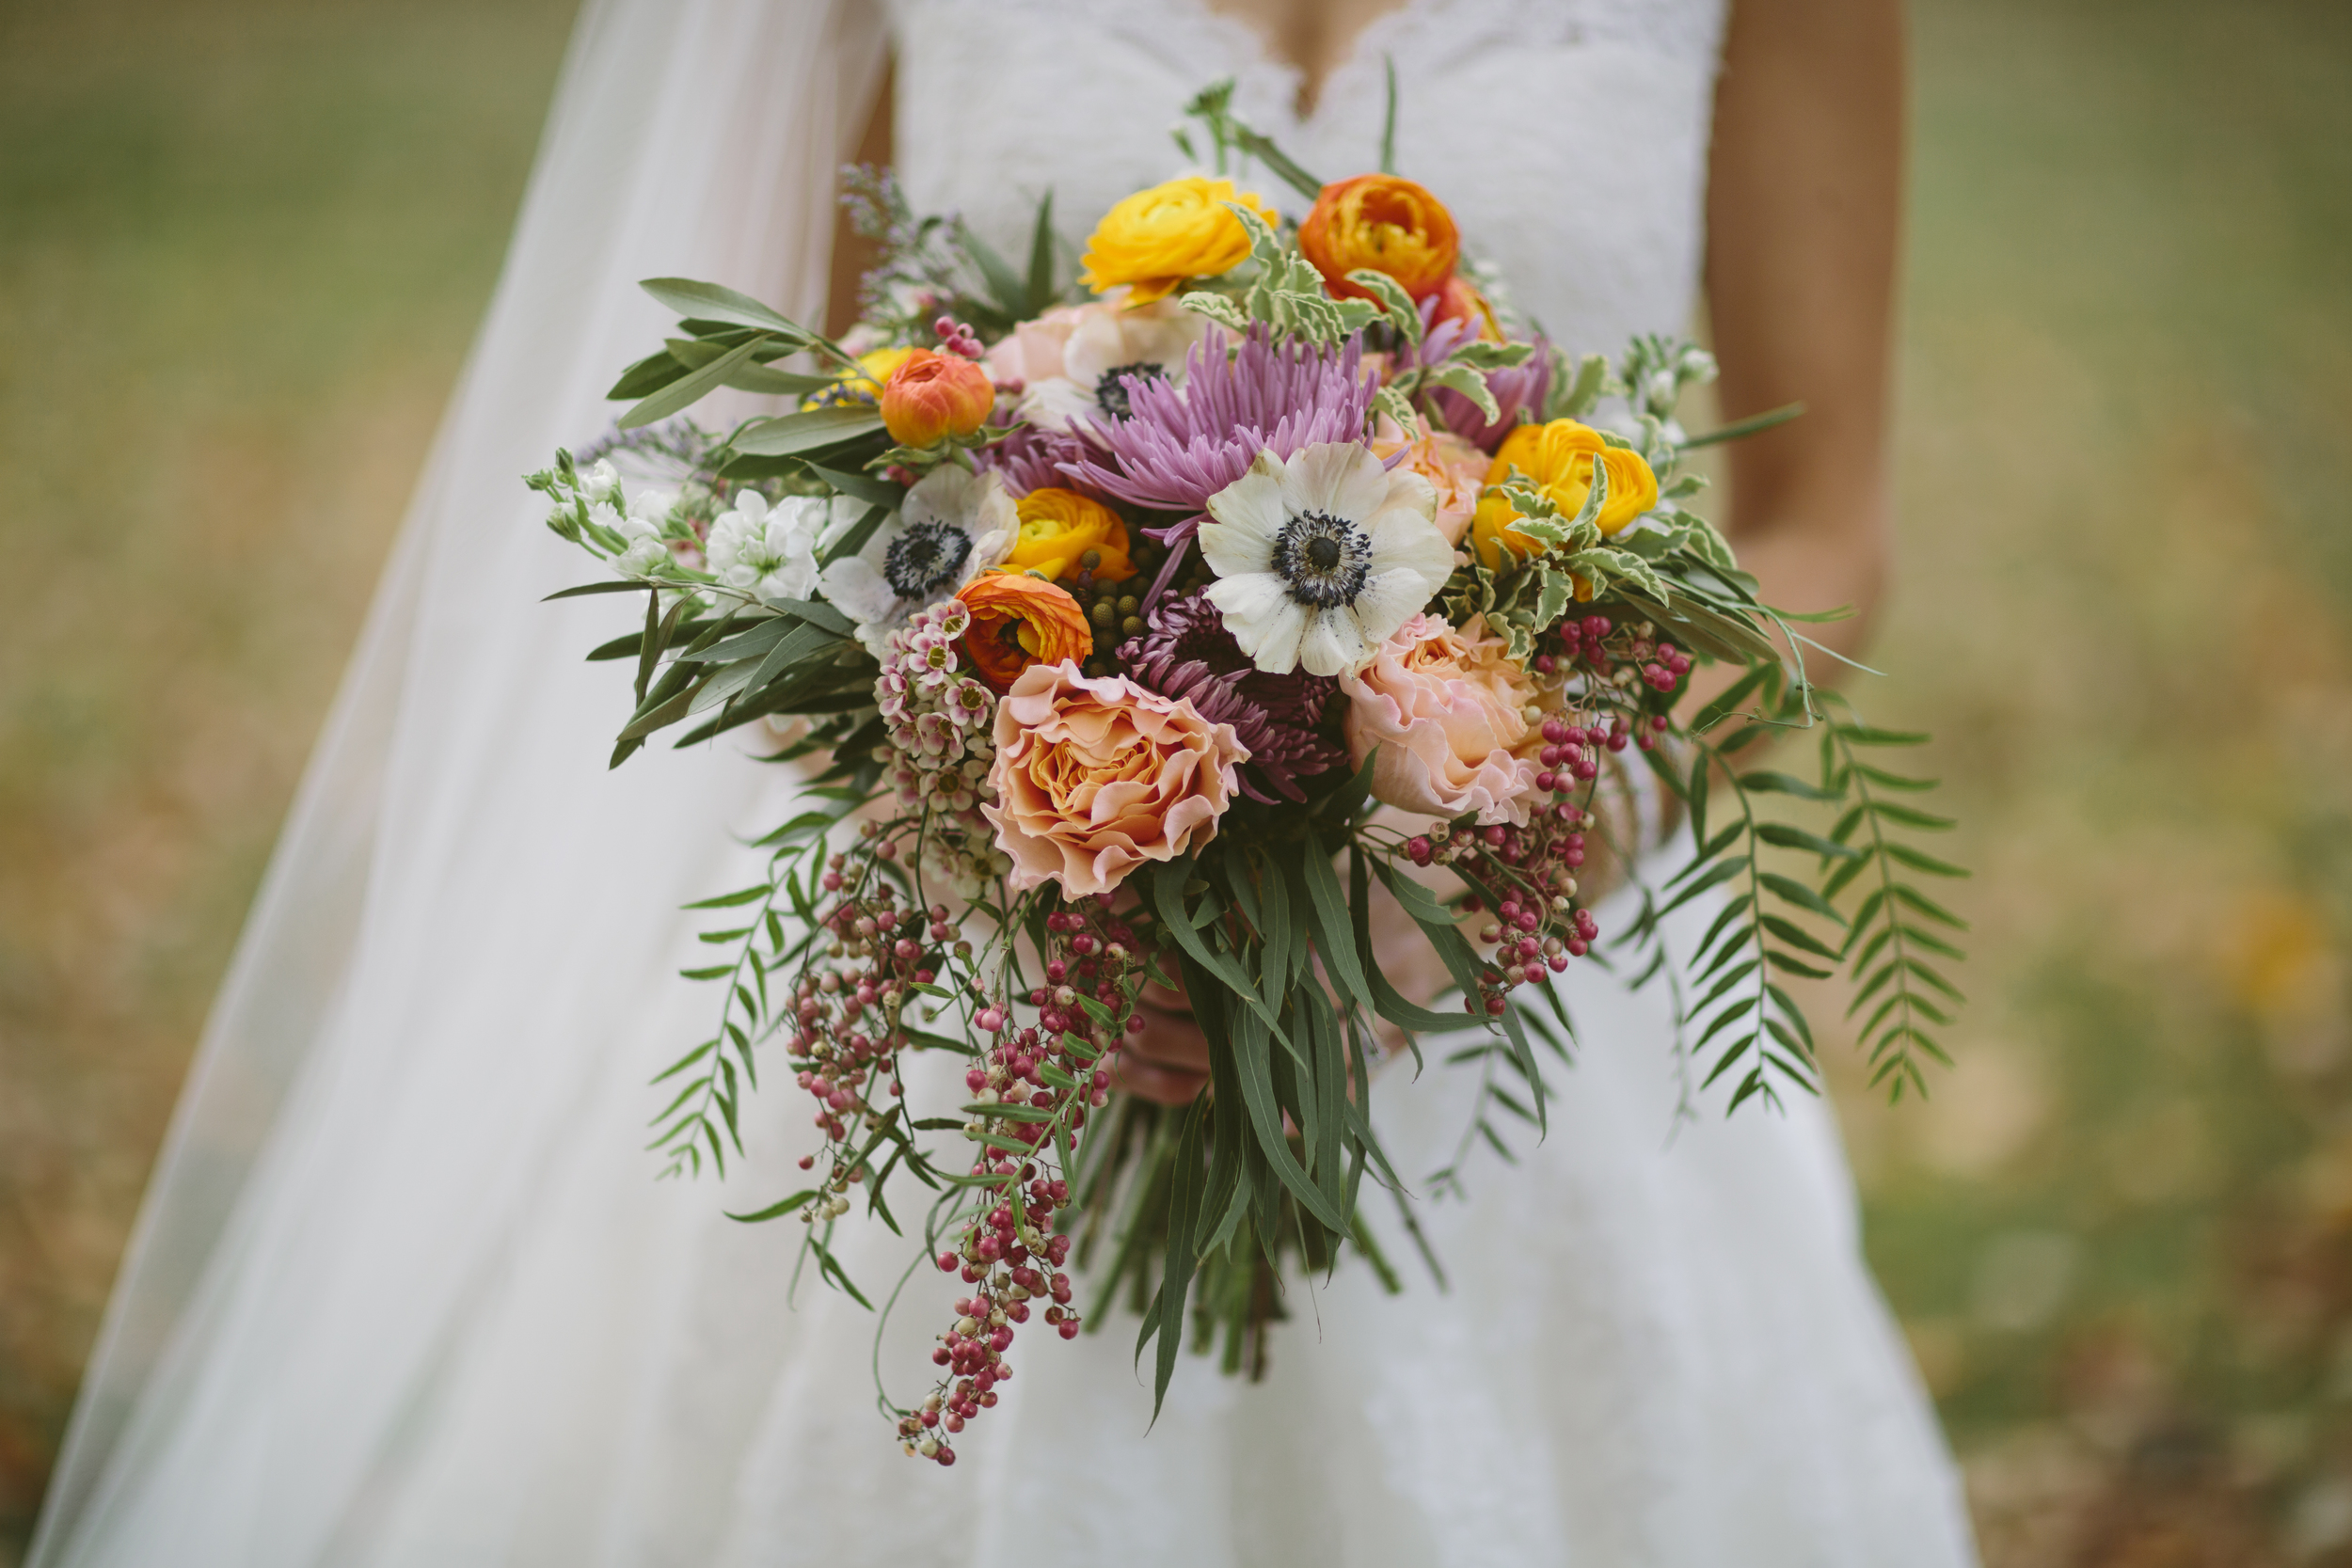 Colorful, bohemian bridal bouquet with anemones, orange ranunculus, peach garden roses, and greenery // Nashville Wedding Flowers